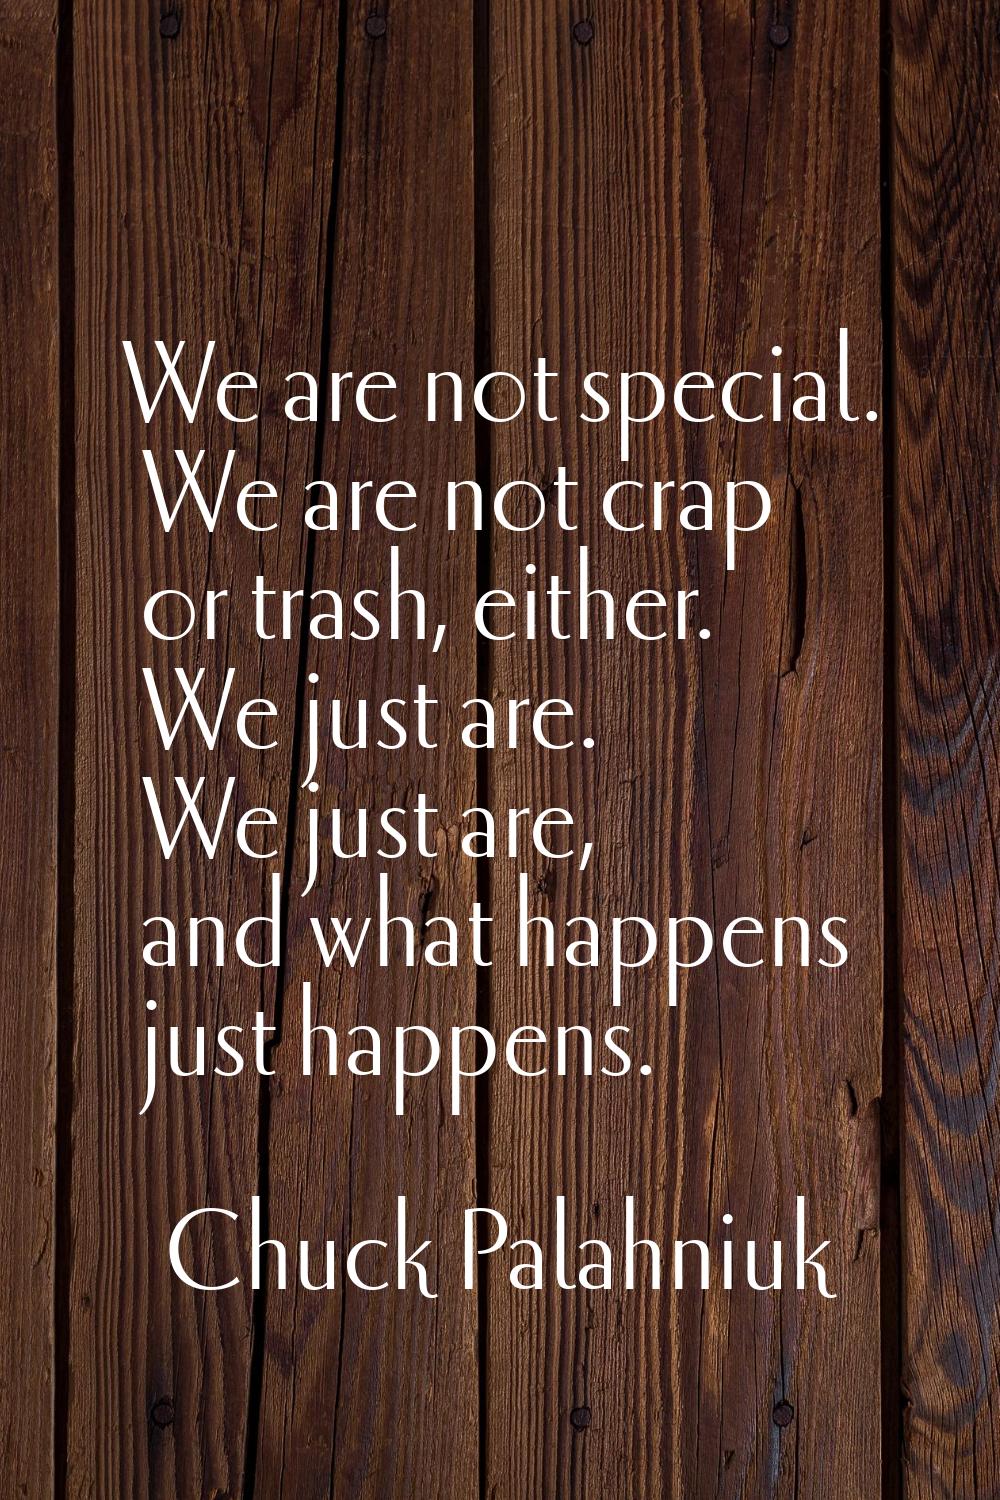 We are not special. We are not crap or trash, either. We just are. We just are, and what happens ju